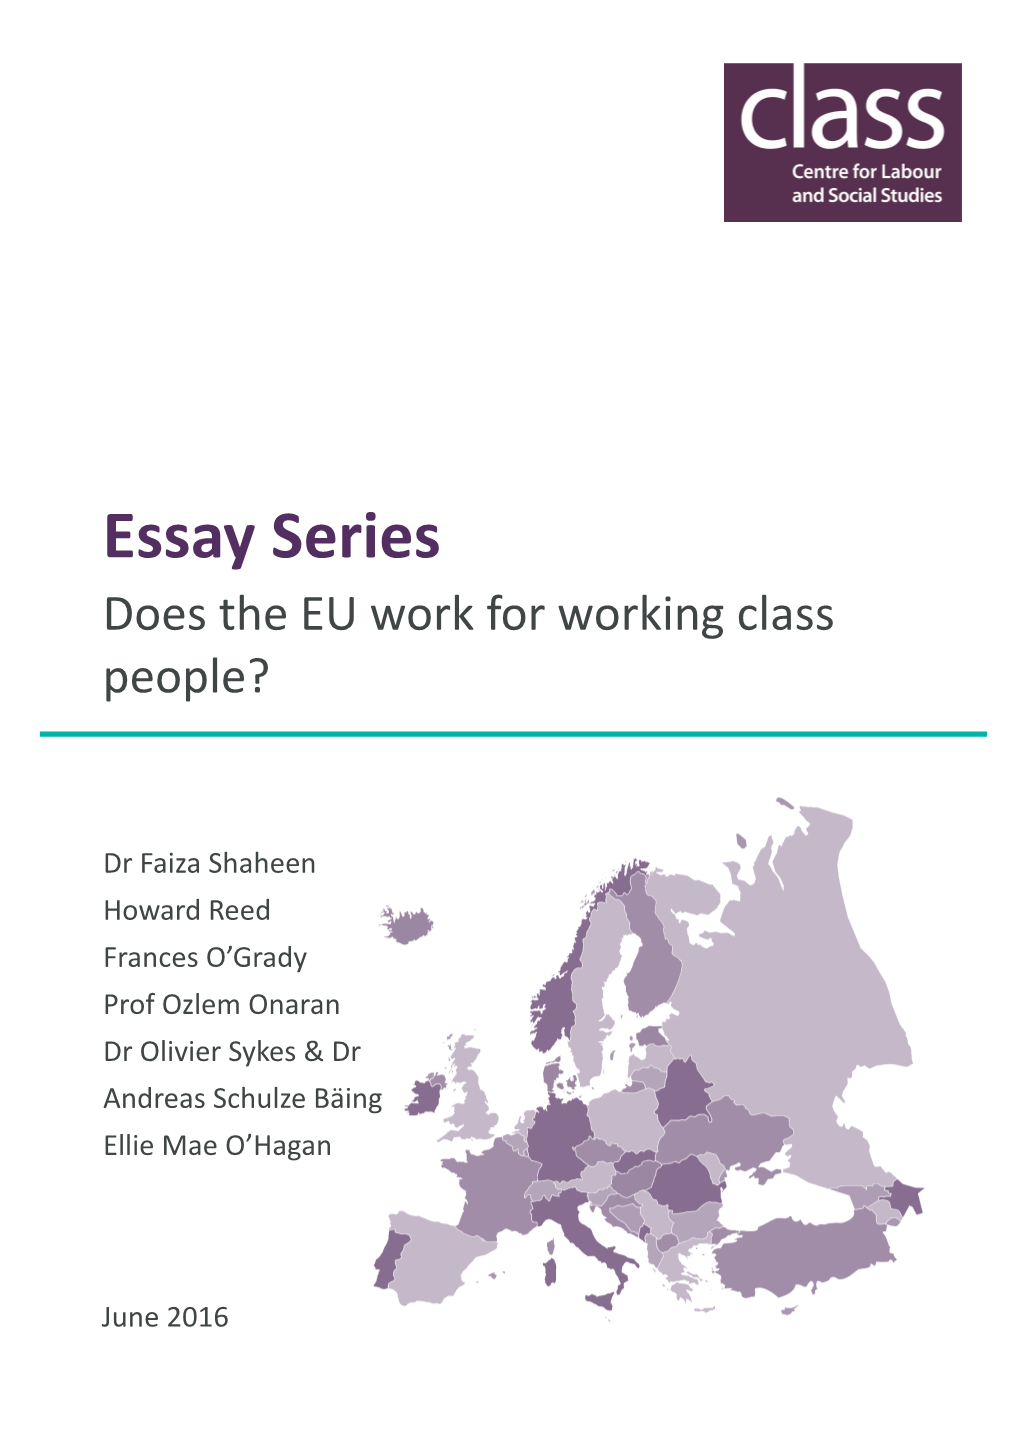 Does the EU Work for Working Class People?